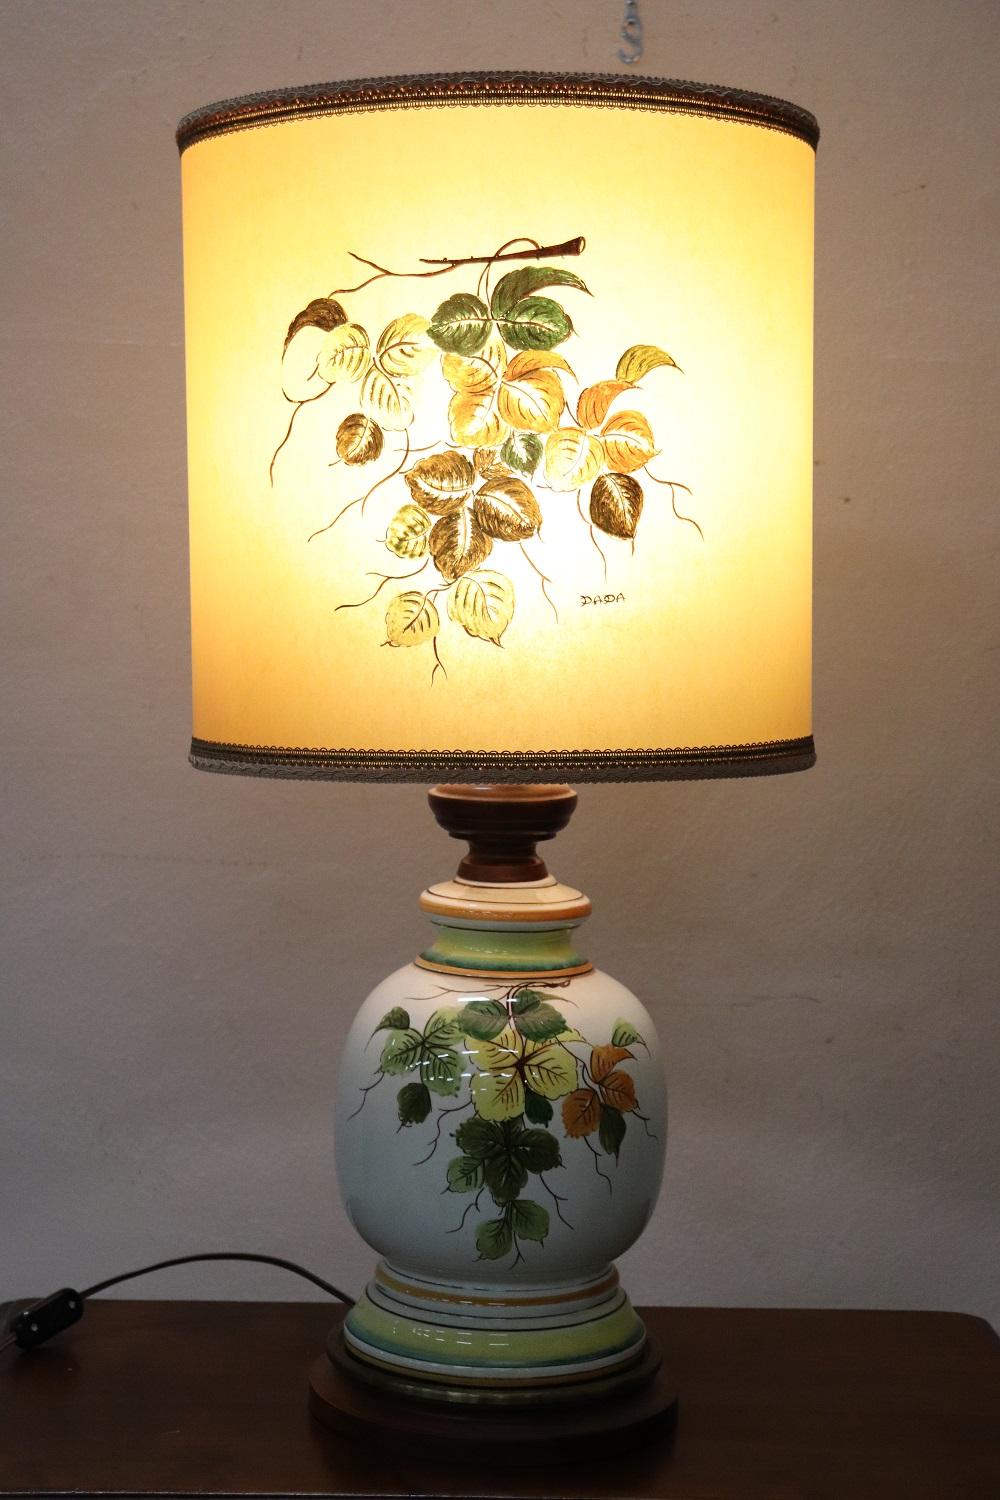 Beautiful table lamp vintage Italian manufacture. Beautiful floral hand painted decoration. This lamp is a true work of art.